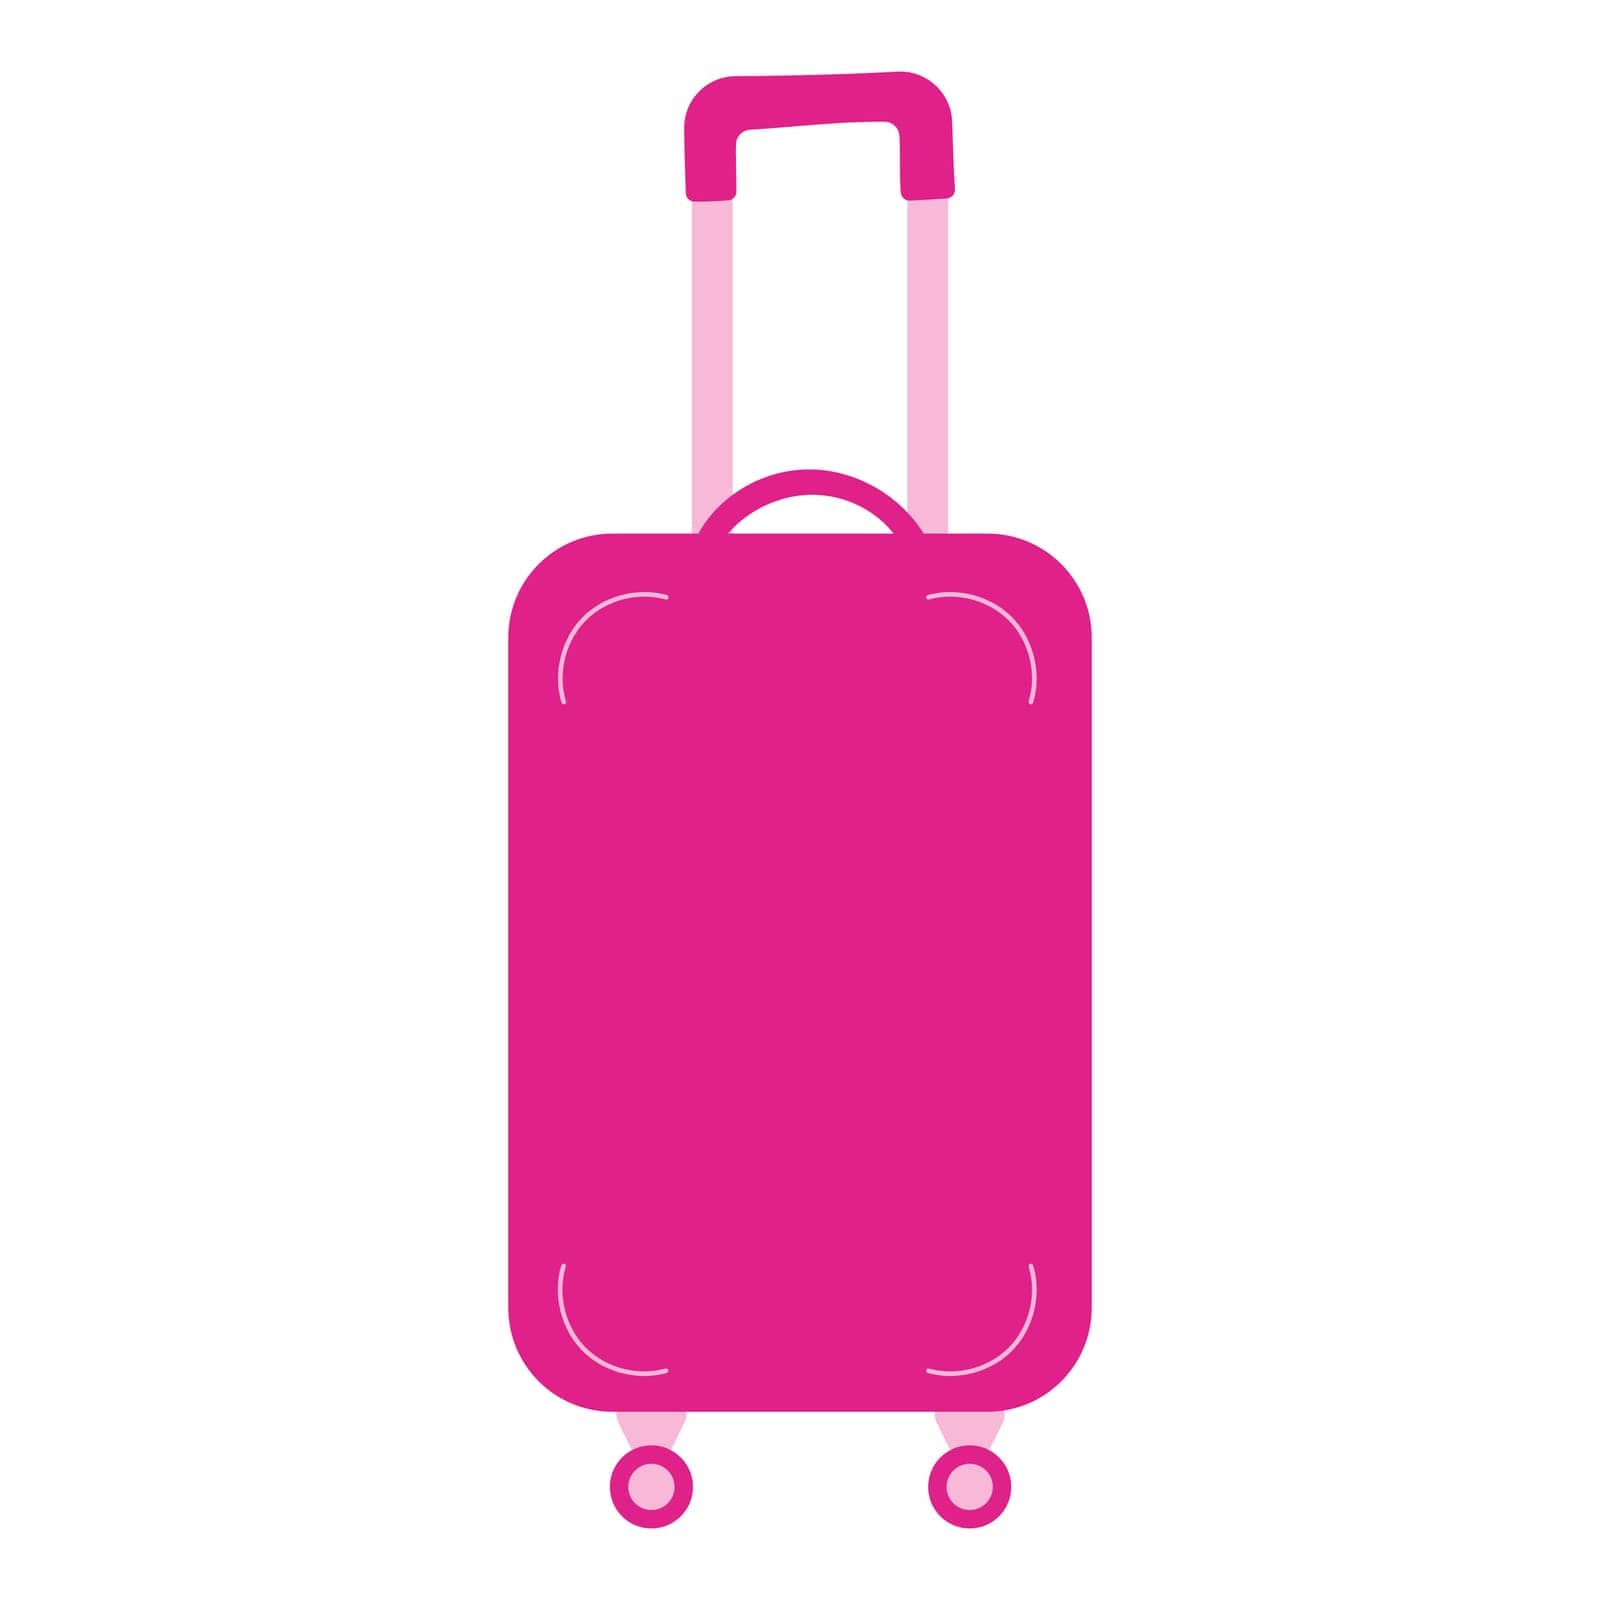 suitcase pink doll travel accessory icon element by kristushka_15_108